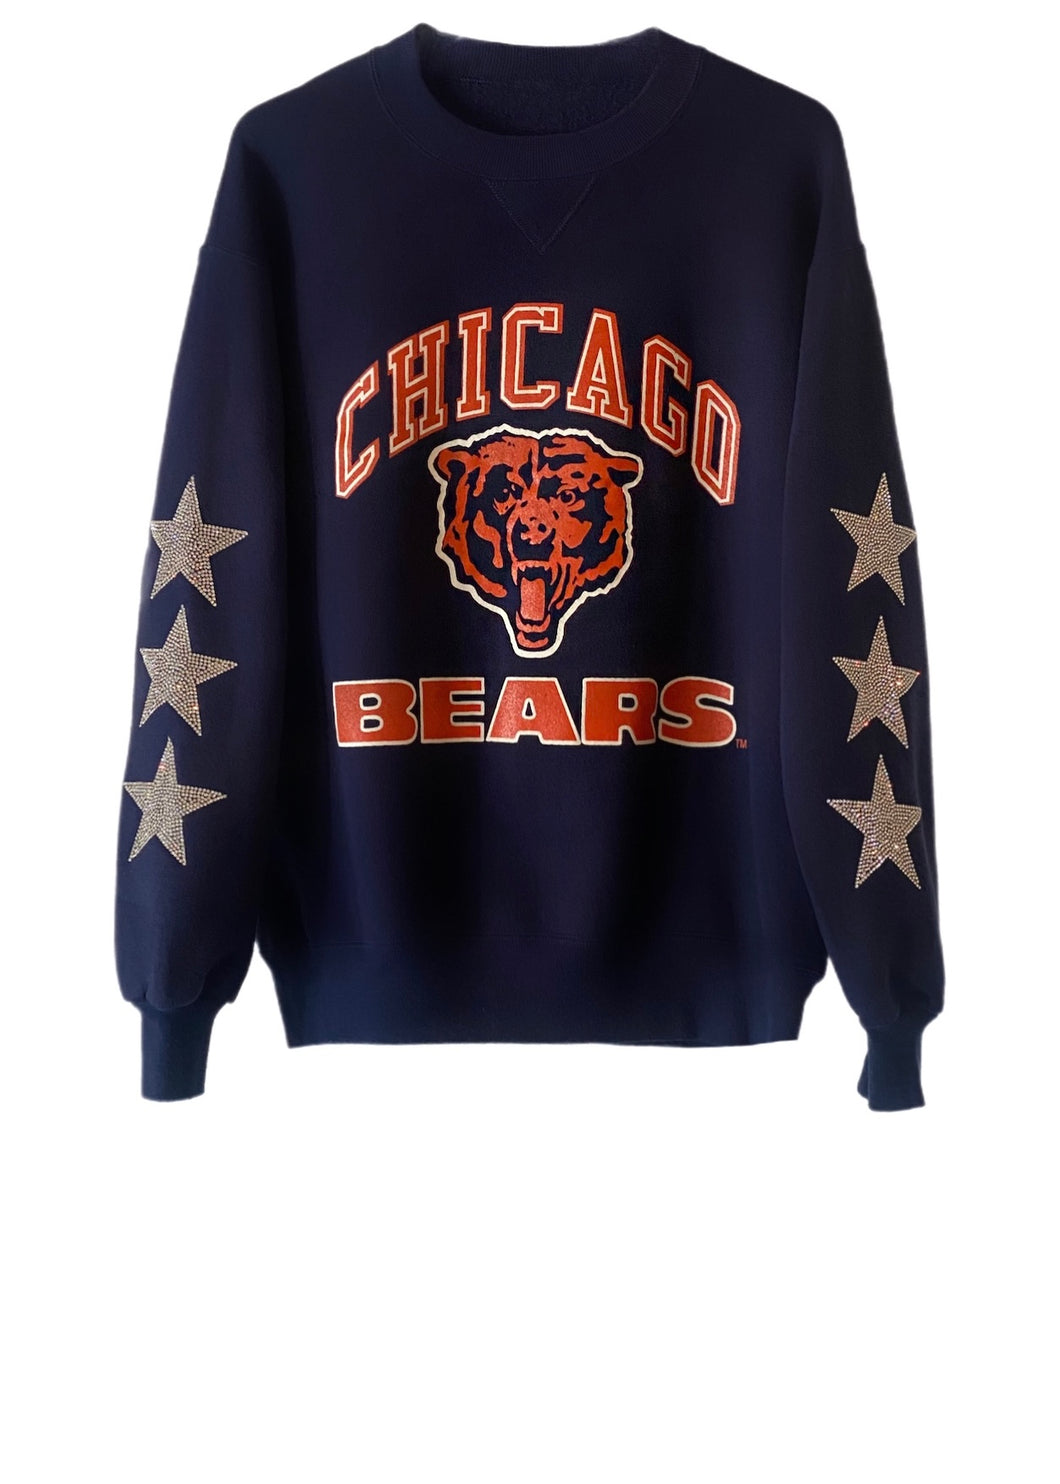 Chicago Bears, NFL One of a KIND Vintage Sweatshirt with Three Crystal Star Design